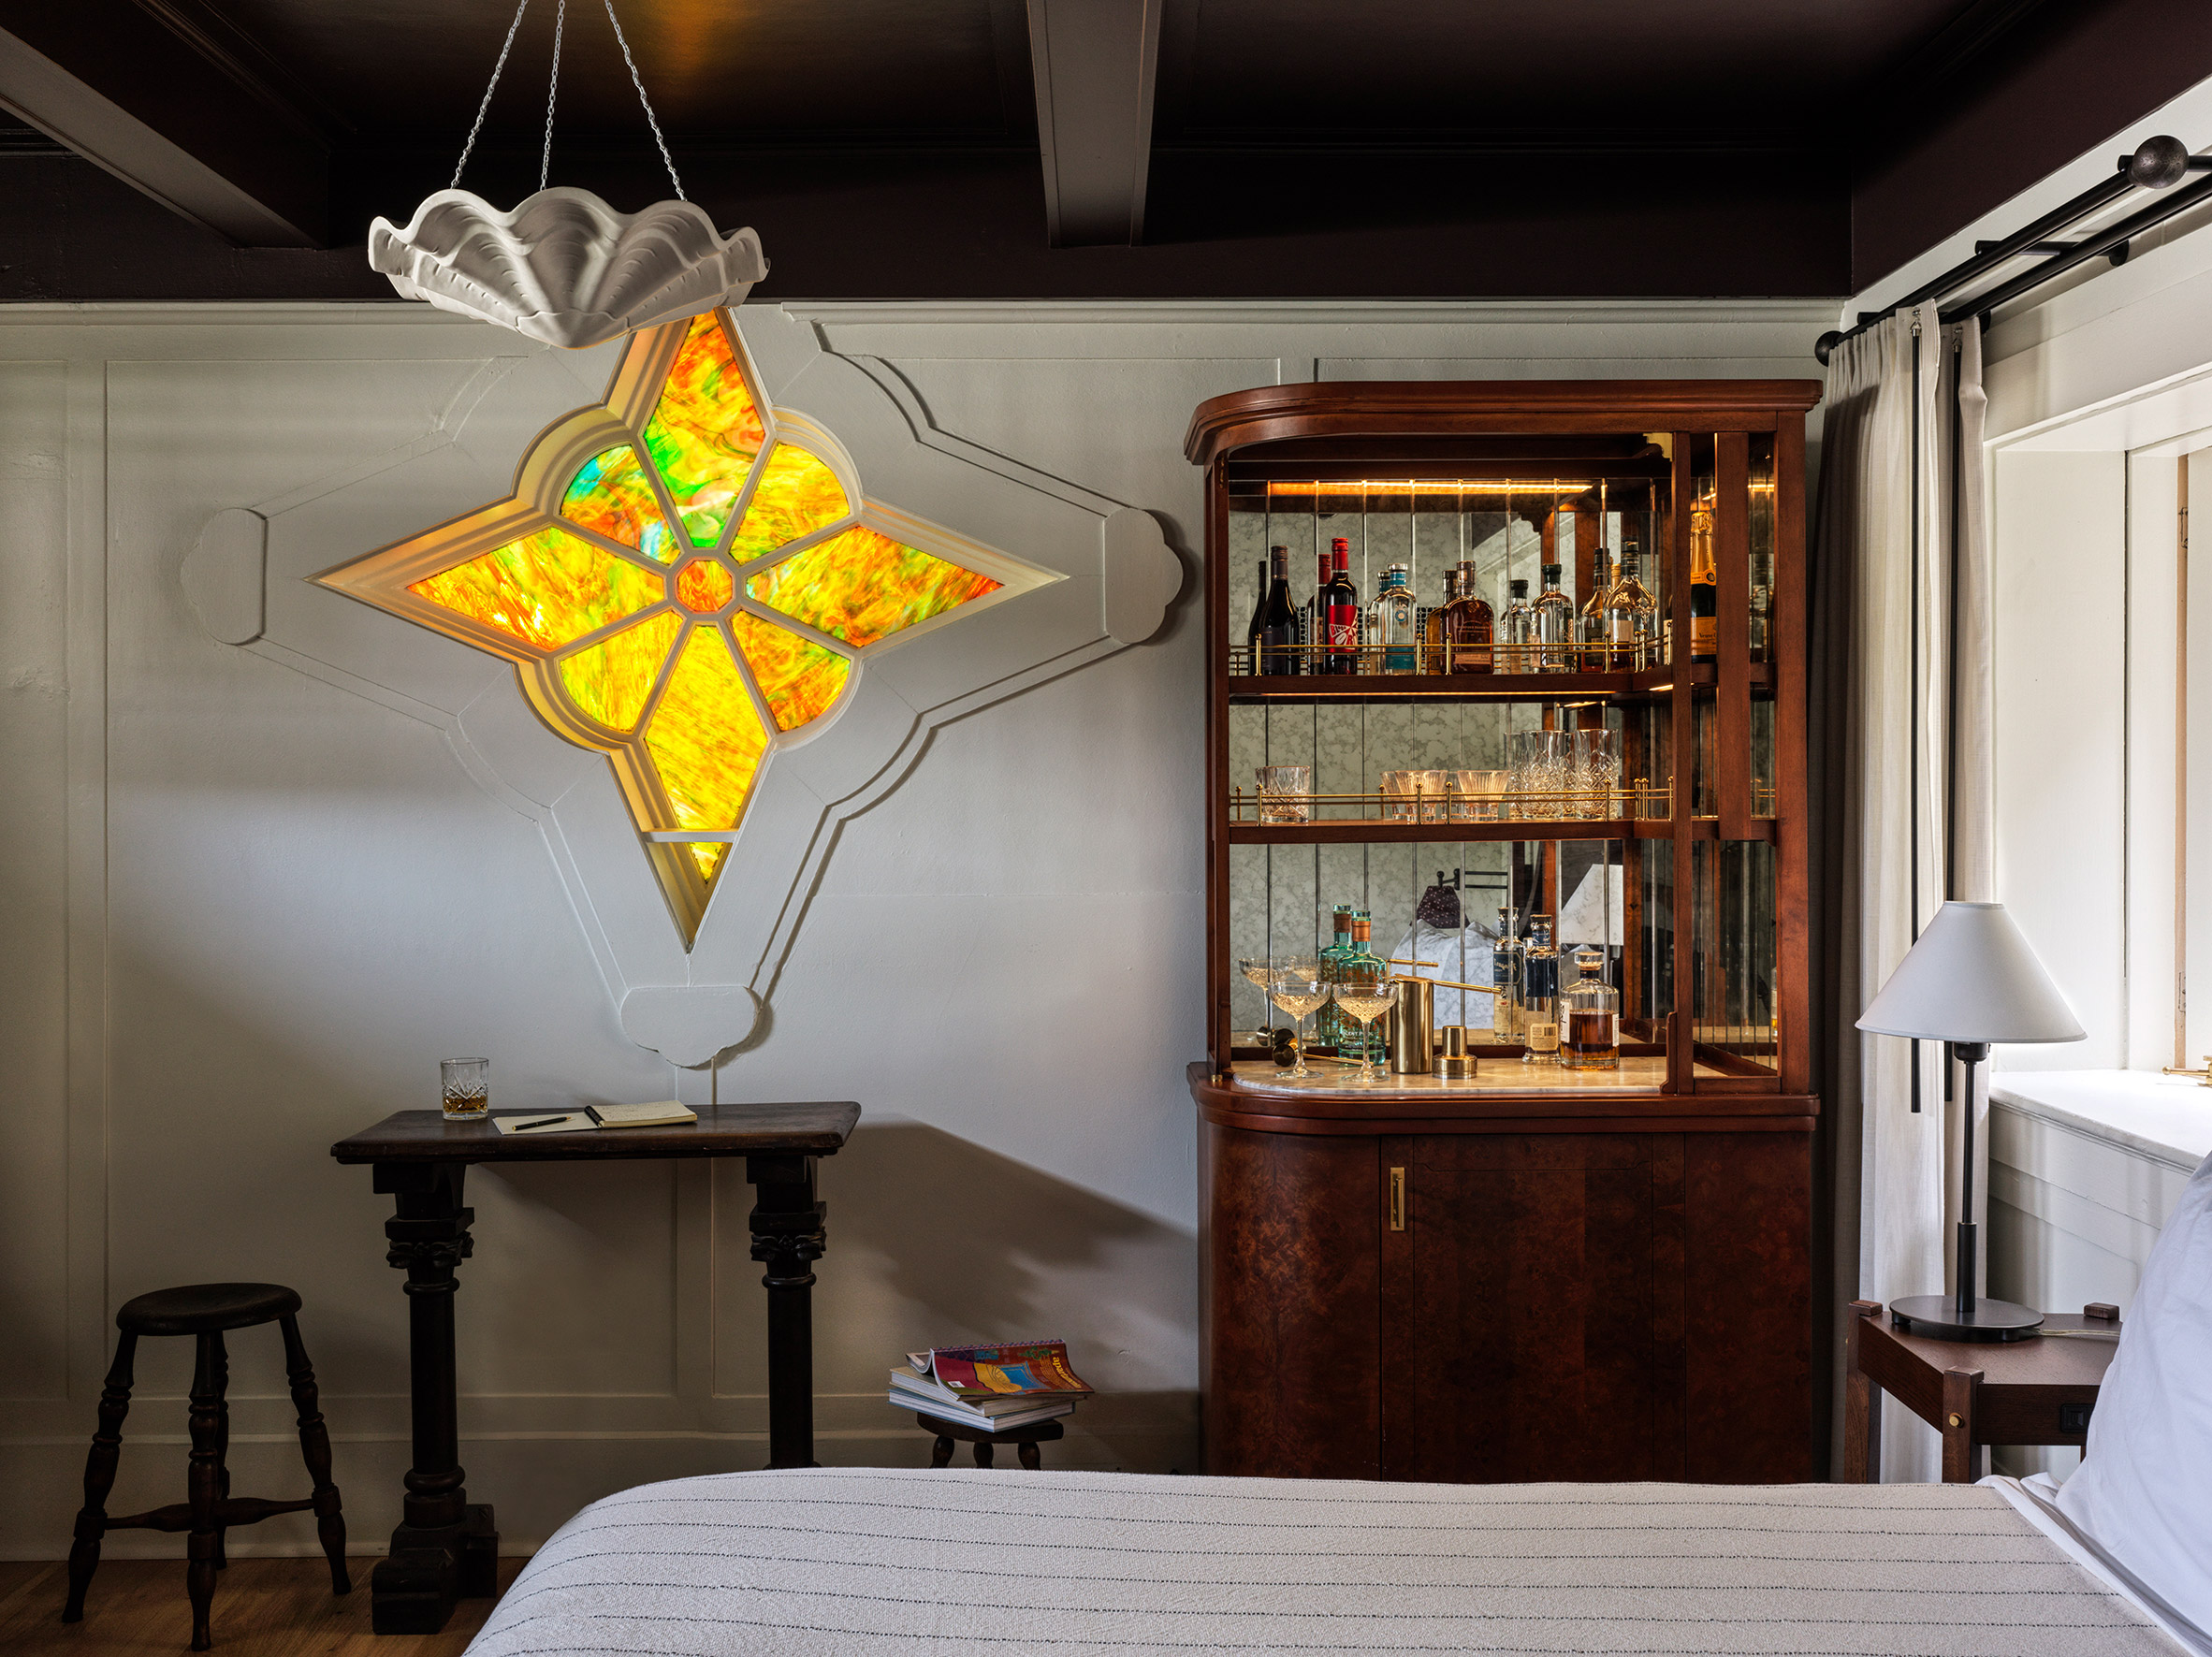 Guest room with a star-shaped stained glass window